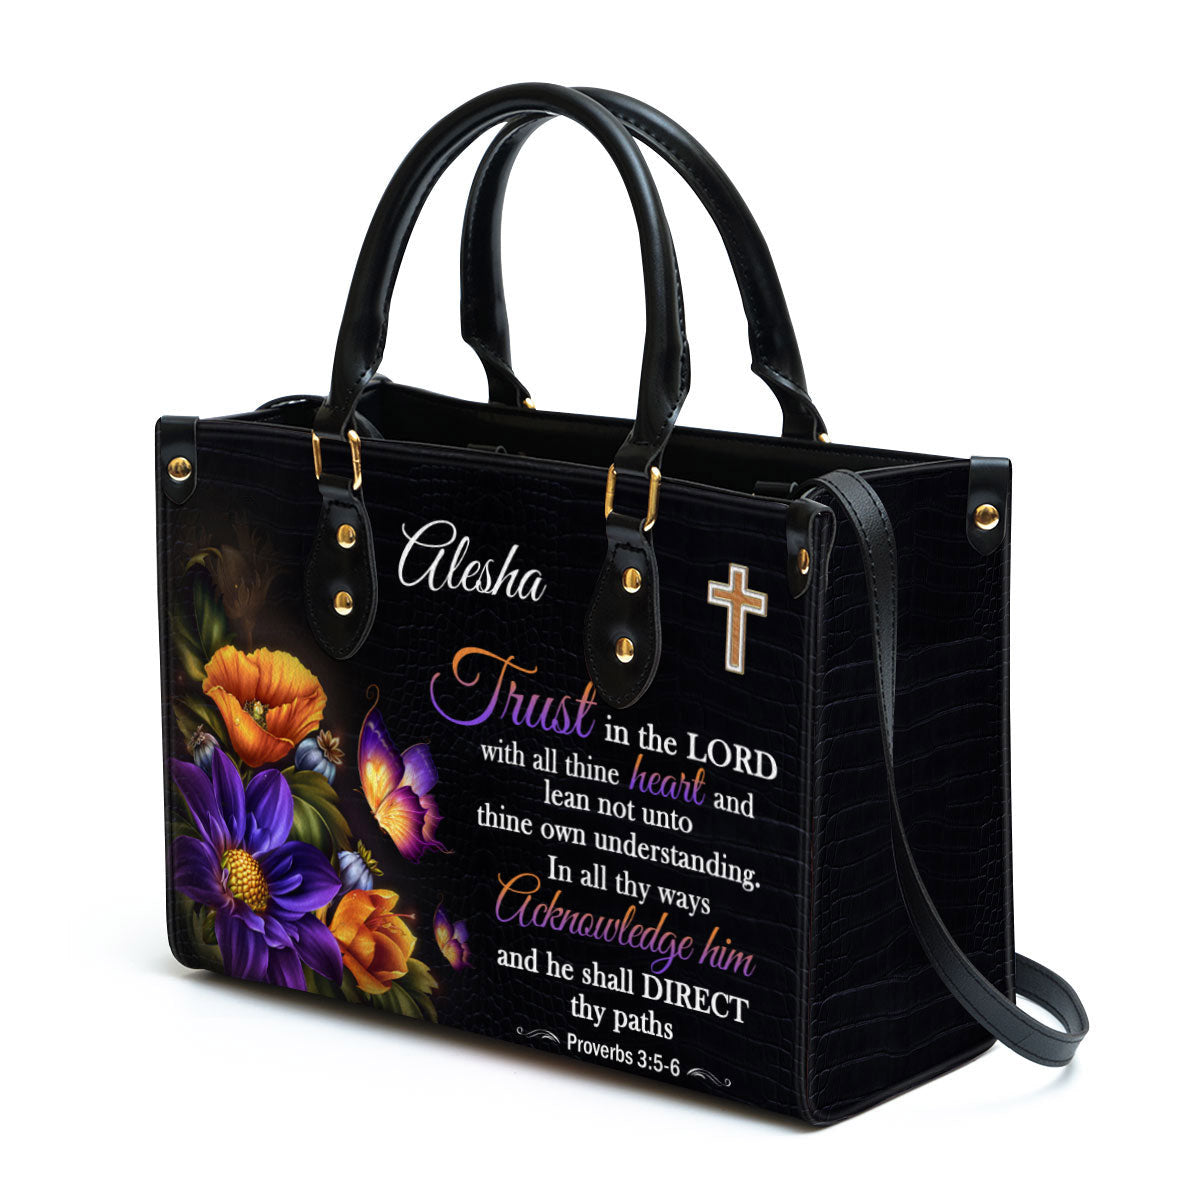 Trust In The Lord With All Thine Heart Leather Bag - Personalized Leather Bag With Handle for Christian Women